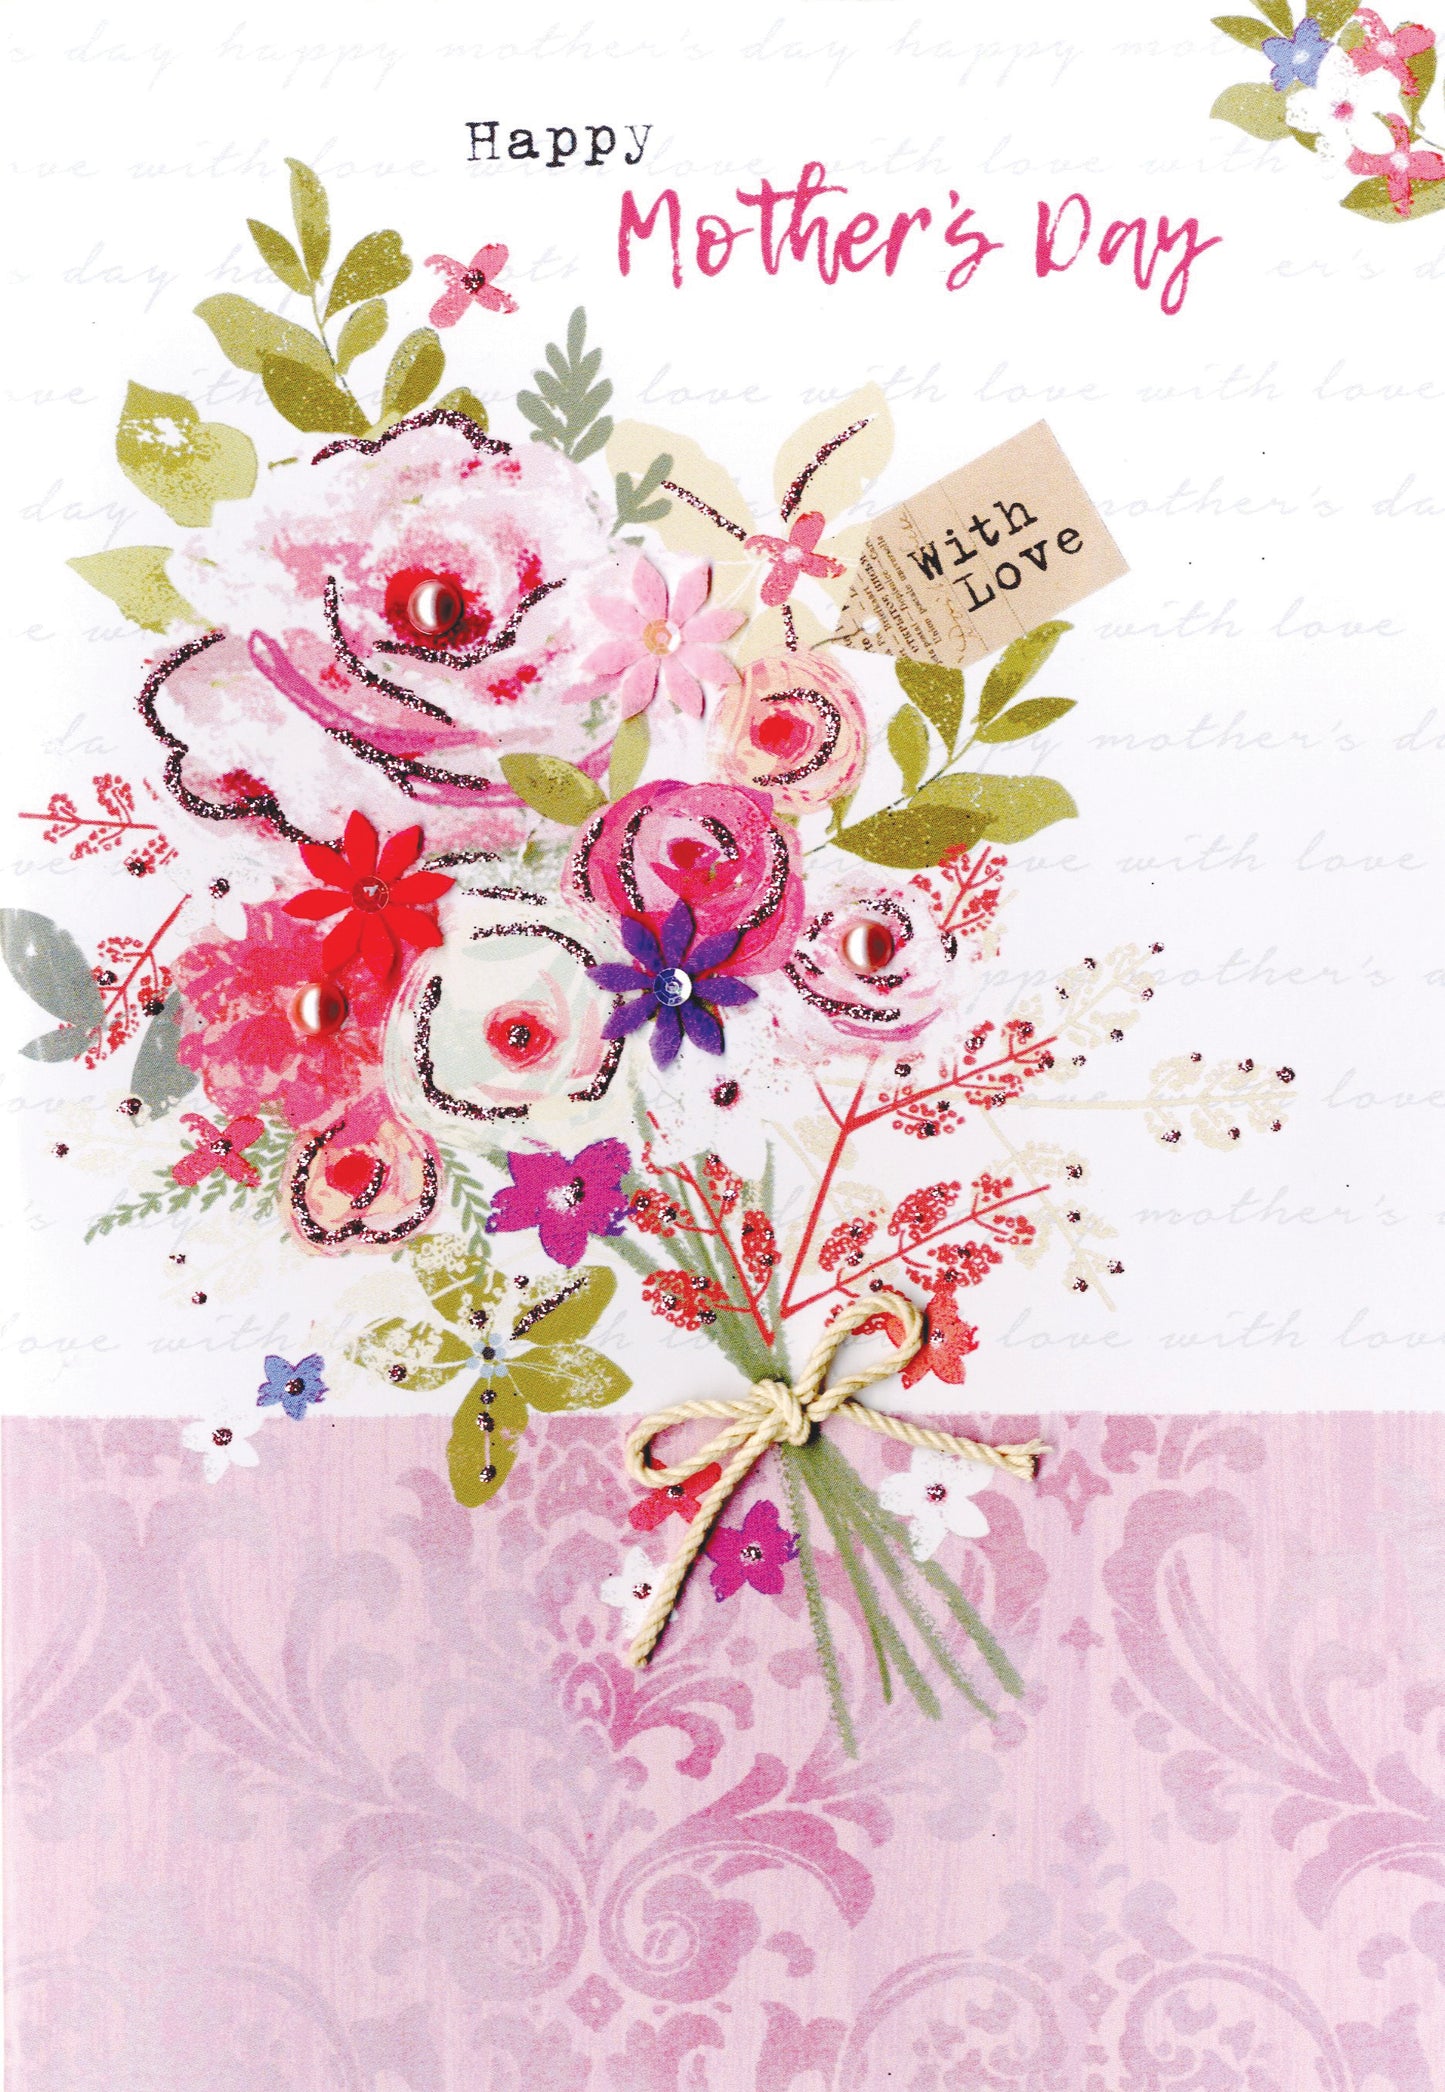 Happy Mother's Day Card With Love Embellished Bouquet